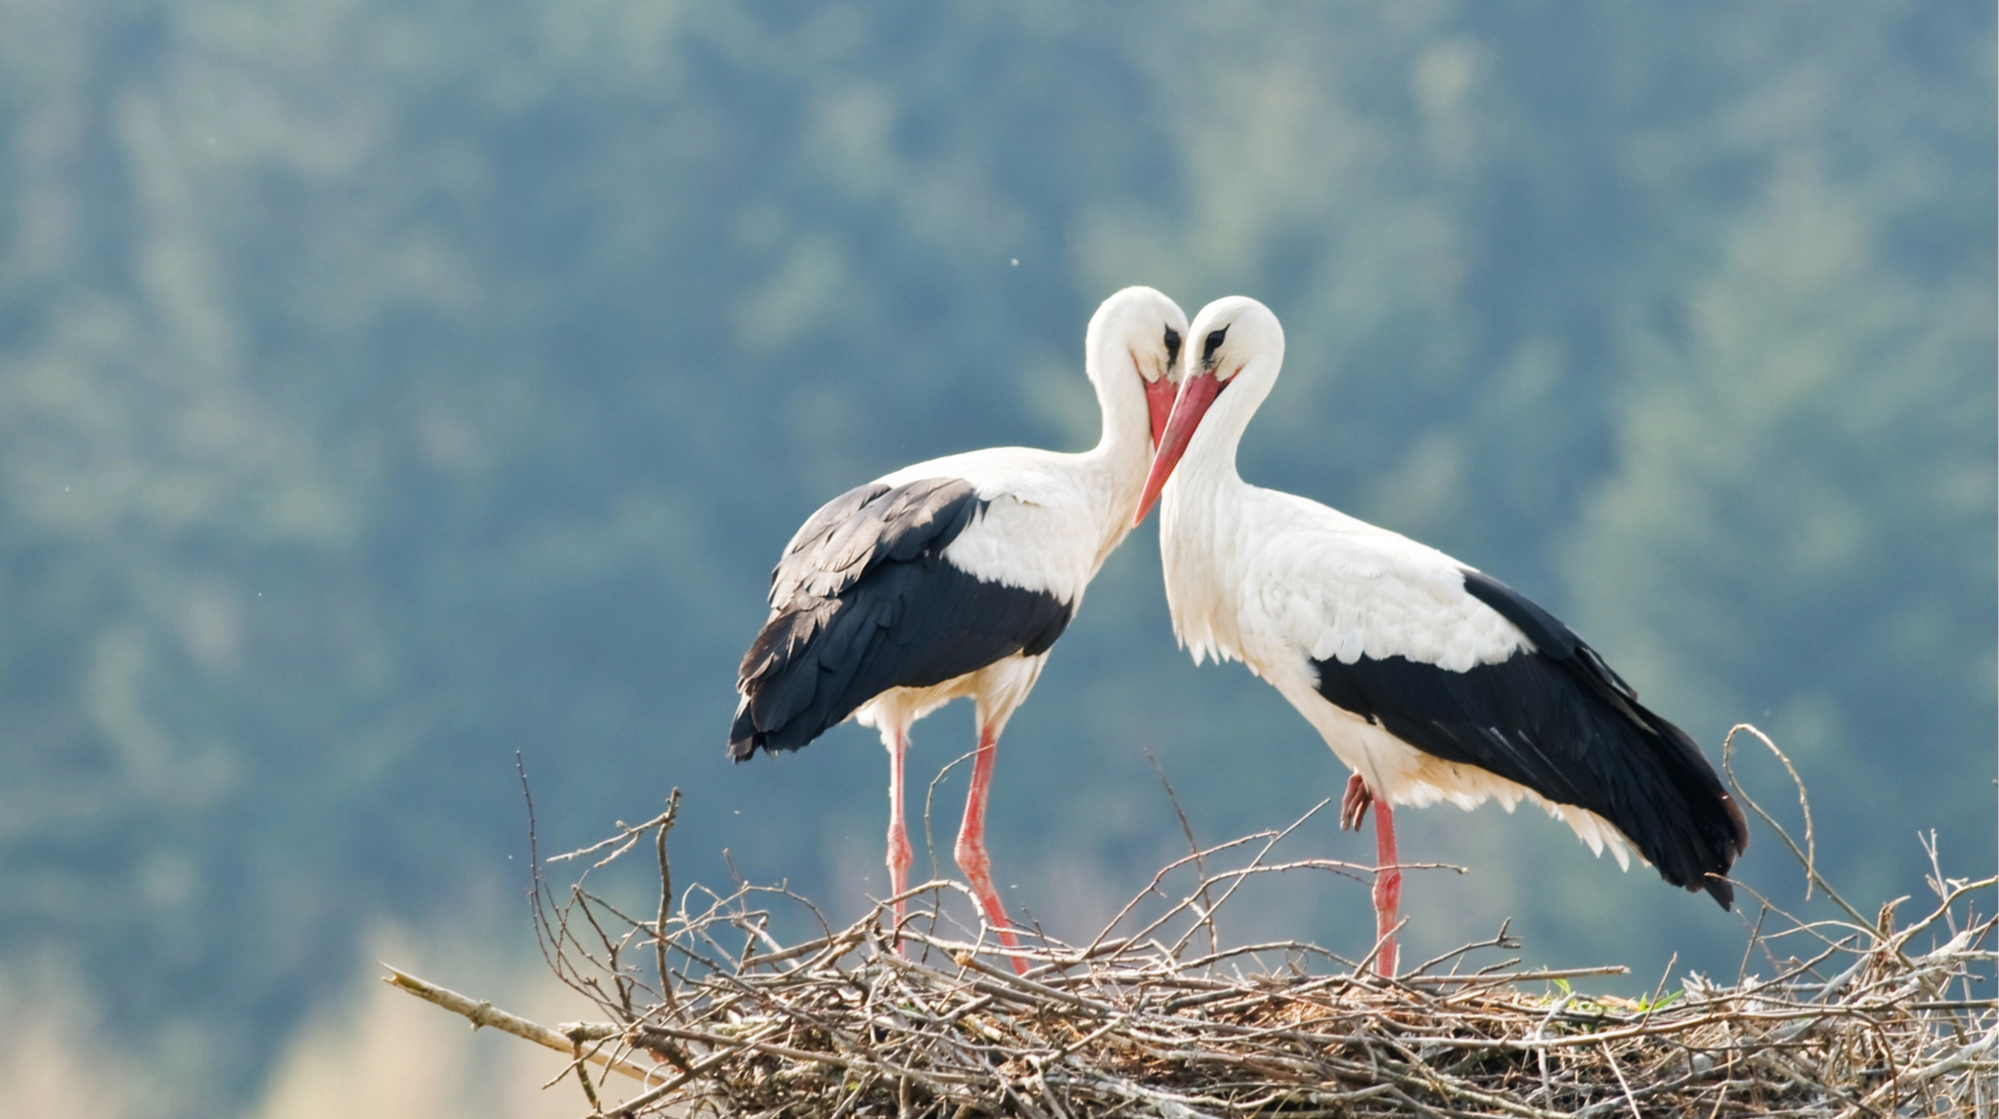 In Ukraine, a mobile application was created to monitor the number of storks: details